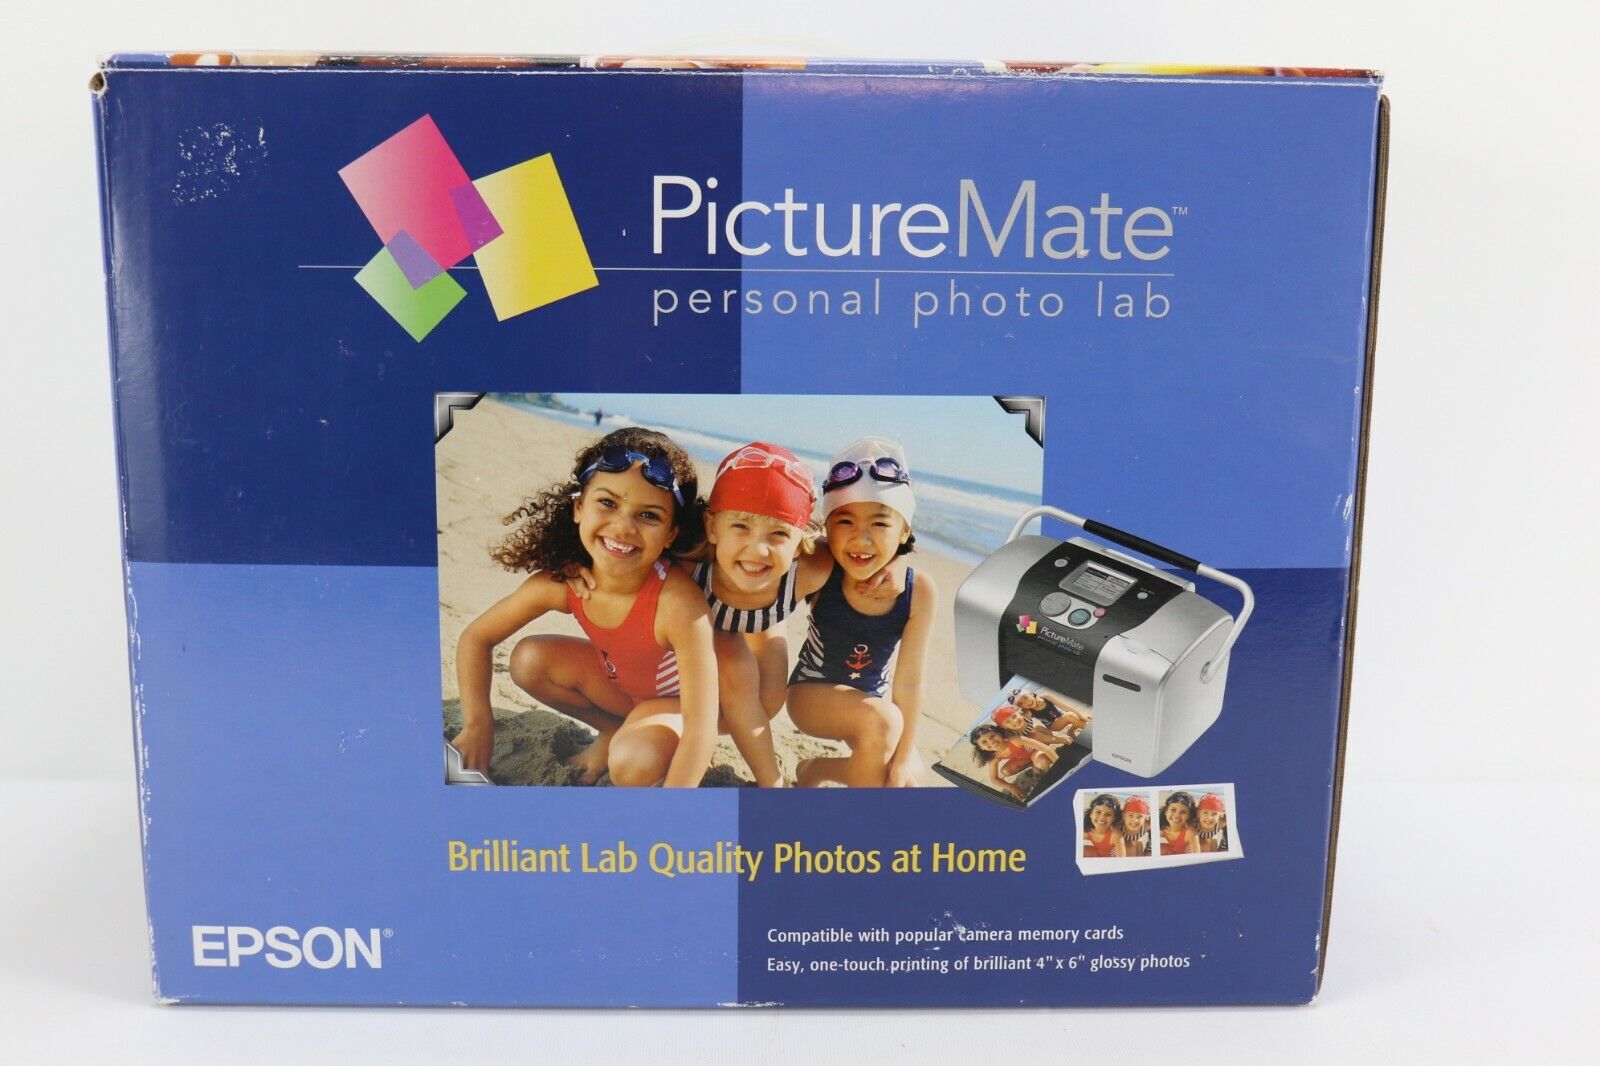 Epson Picture Mate Personal Camera Photo Lab Brilliant Quality at Home Complete